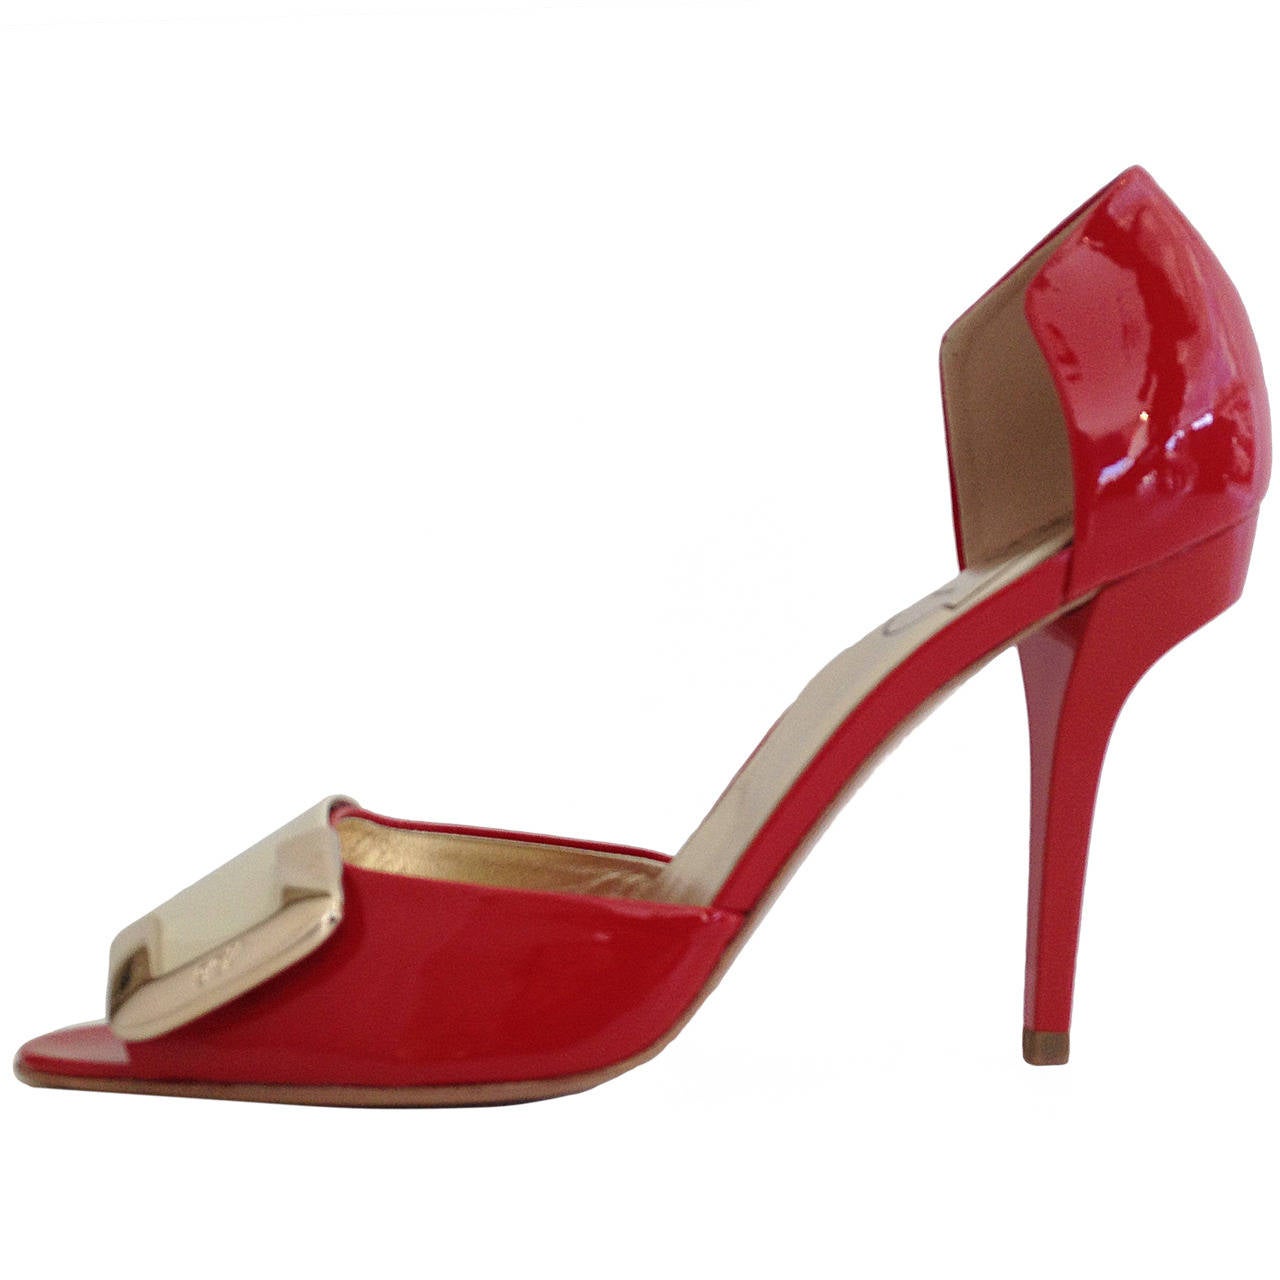 Roger Vivier Red and Cream Patent D'Orsay Heel